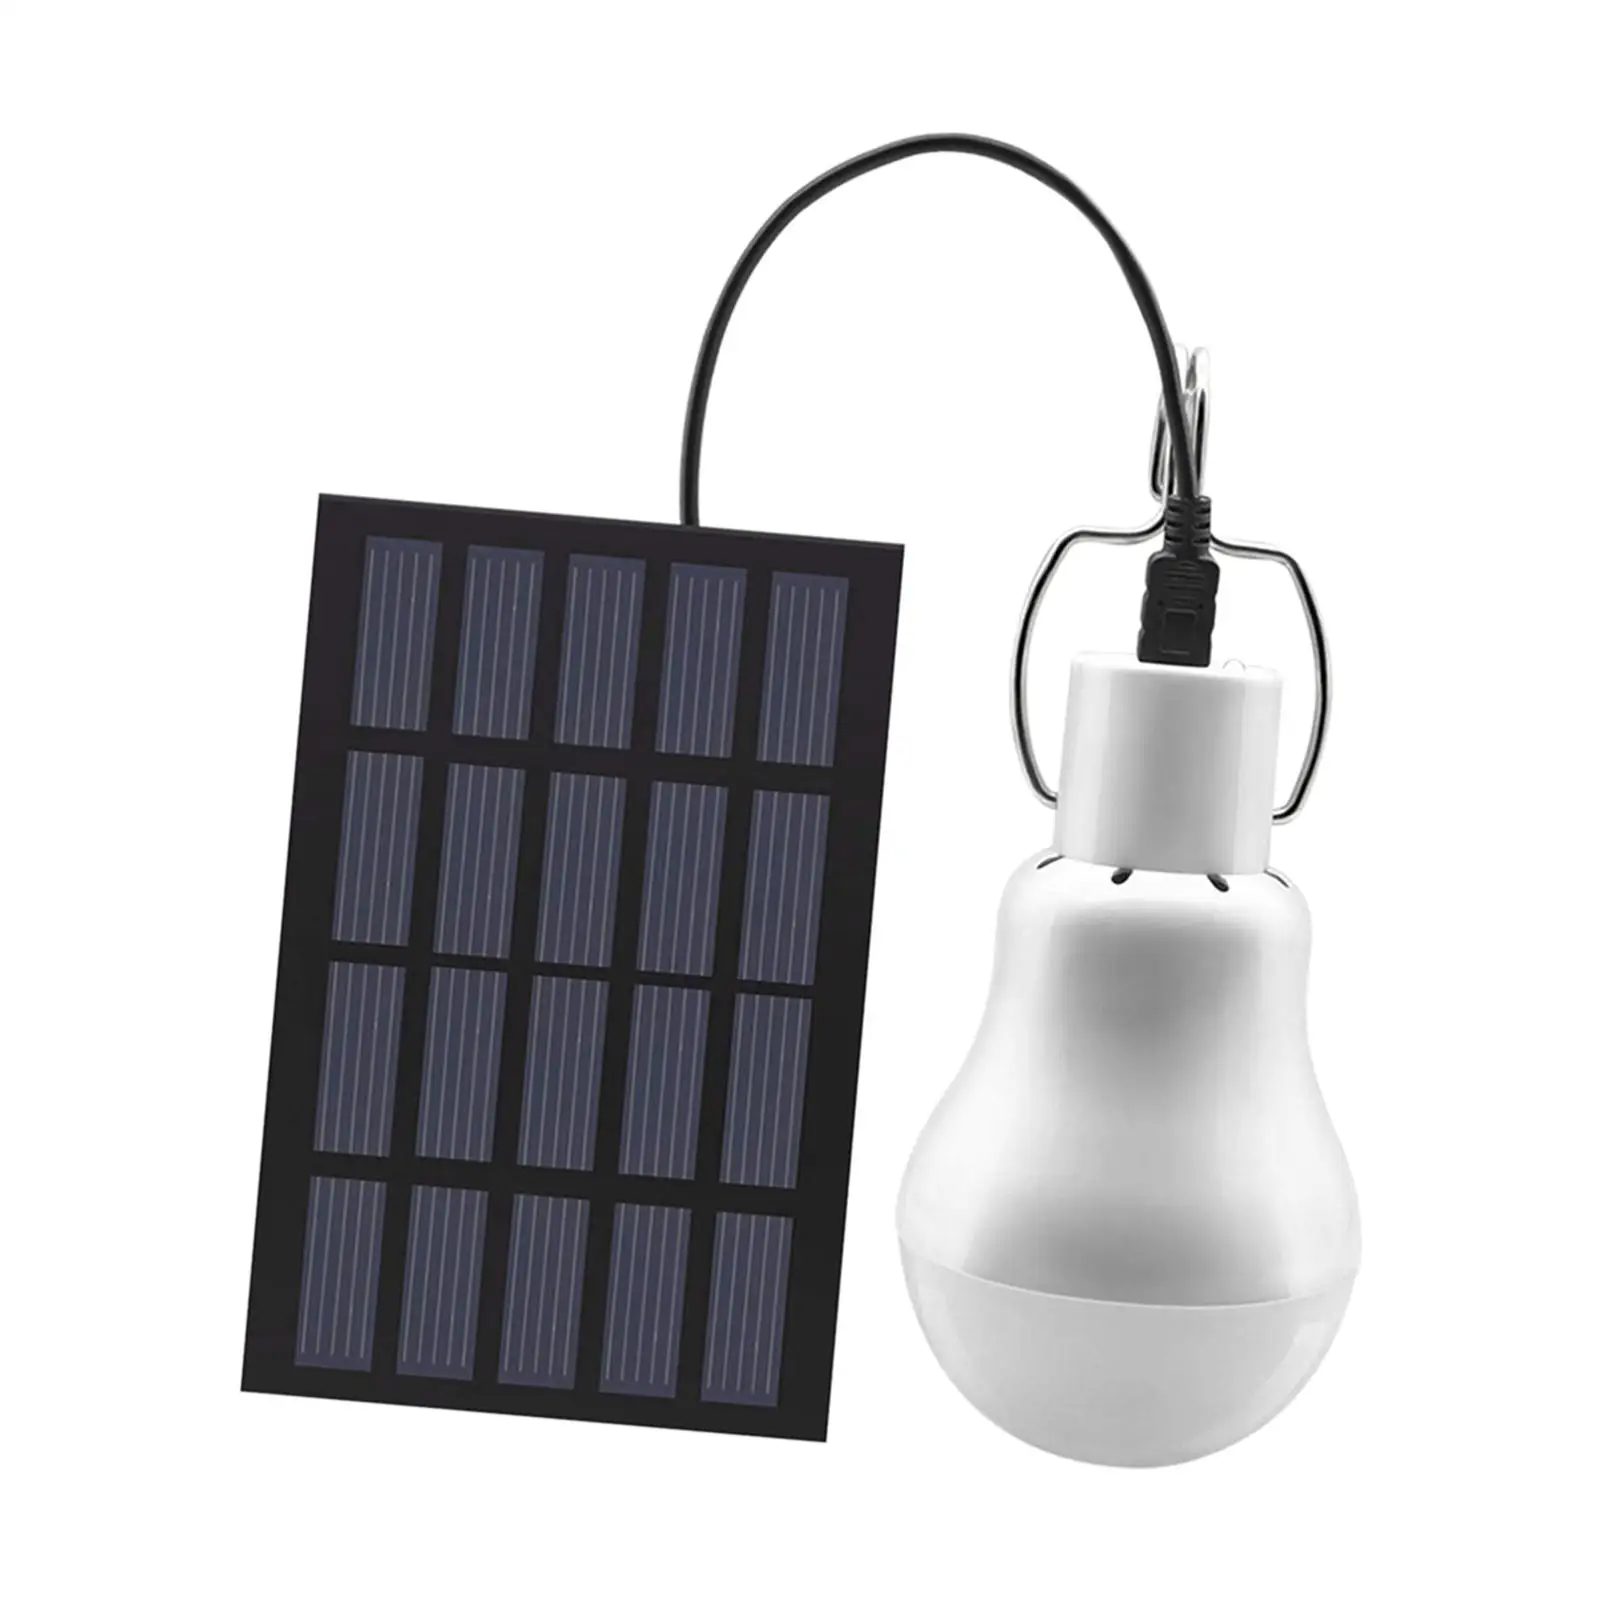 Portable LED Bulb Light Camping Solar Powered Panel Garden Hanging Lamp Lighting for Indoor Outdoor Yard Backpacking Lamp